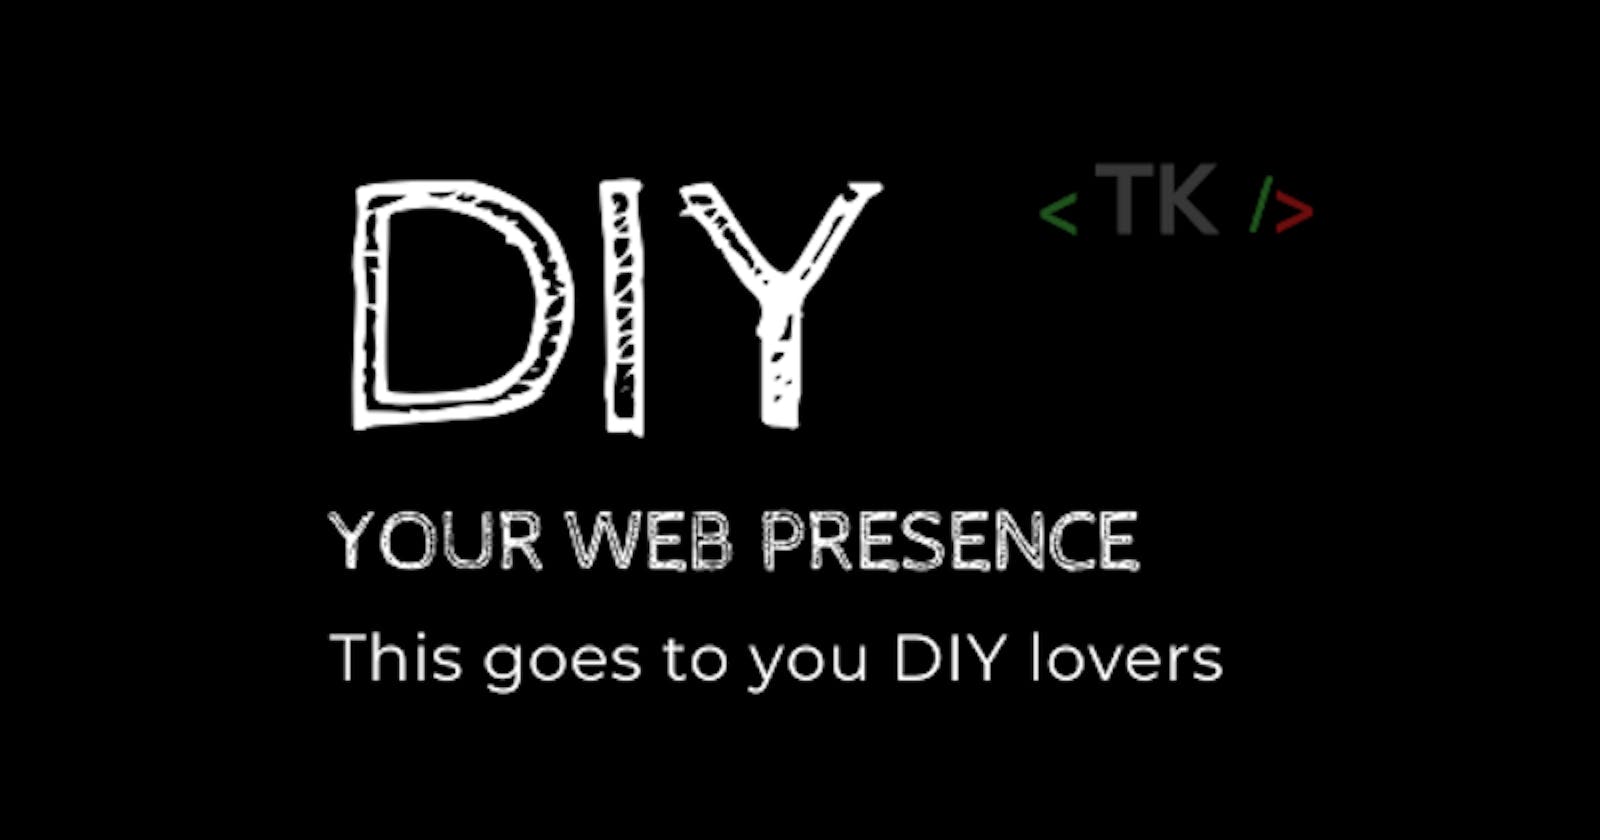 4. #DIY your web presence | A Custom domain name on your site & version control